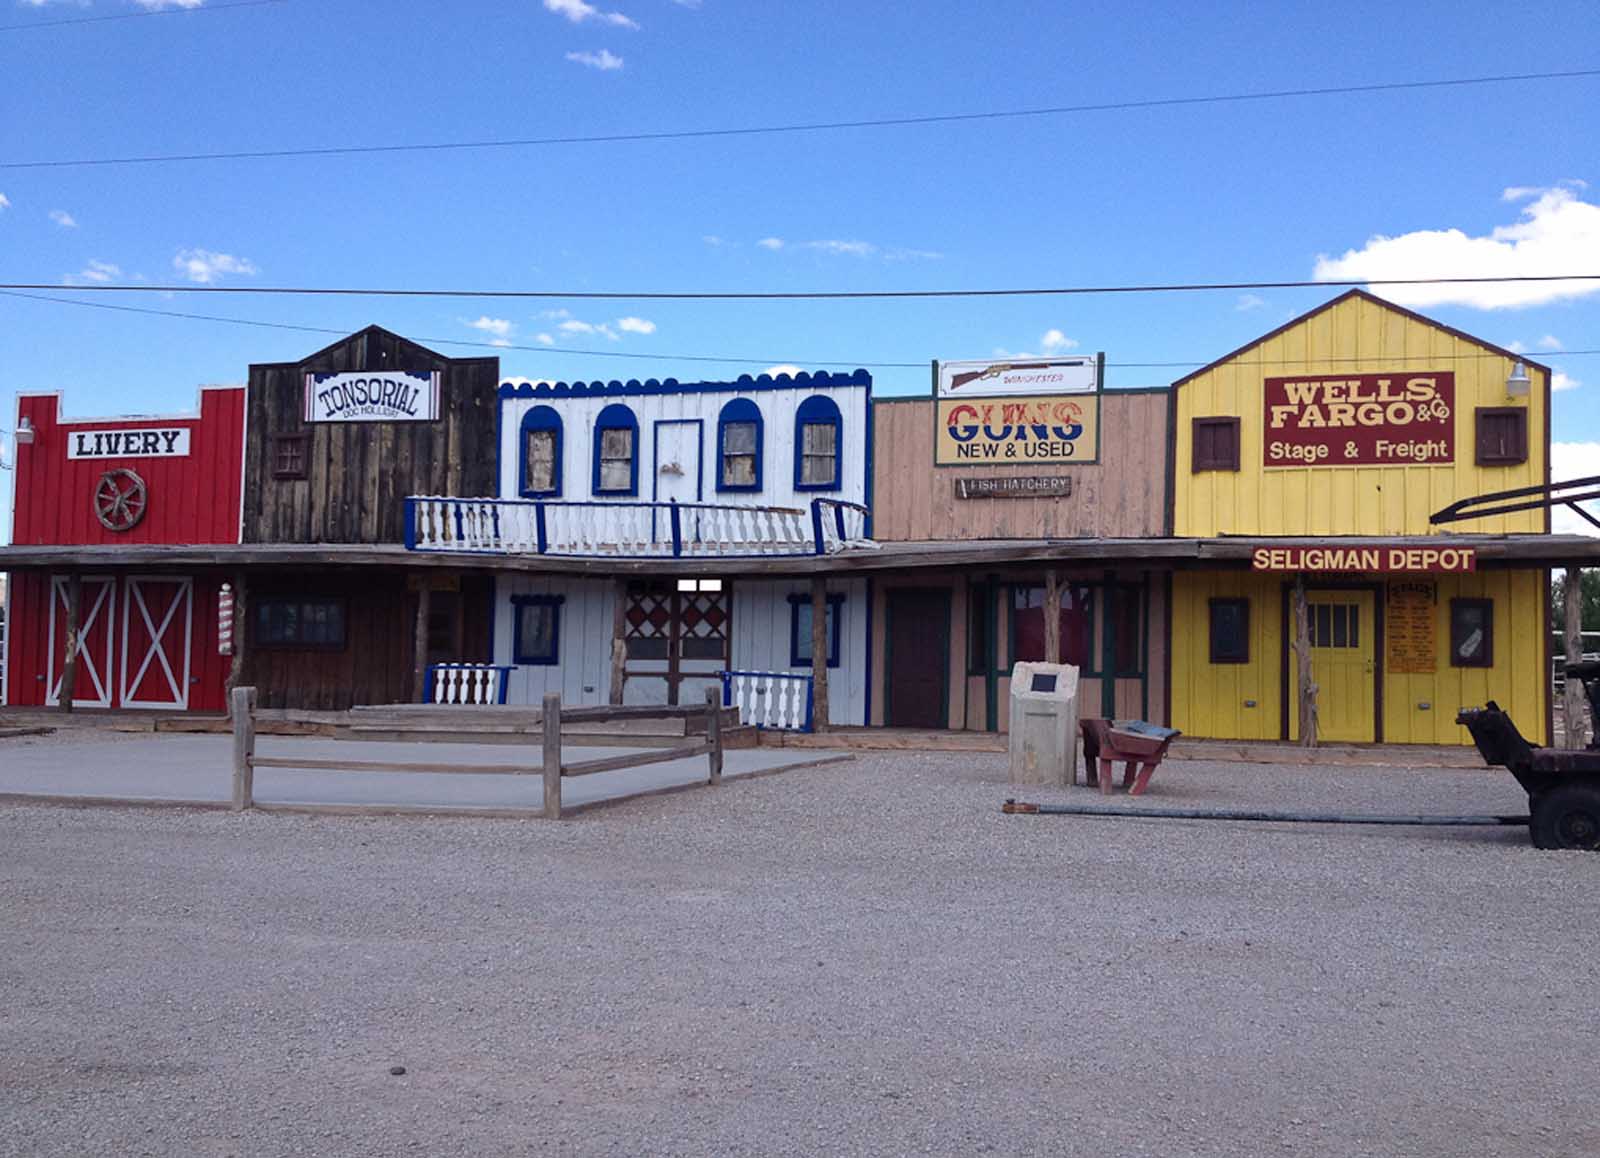 wells fargo and old town facades in arizona on a route 66 mother road